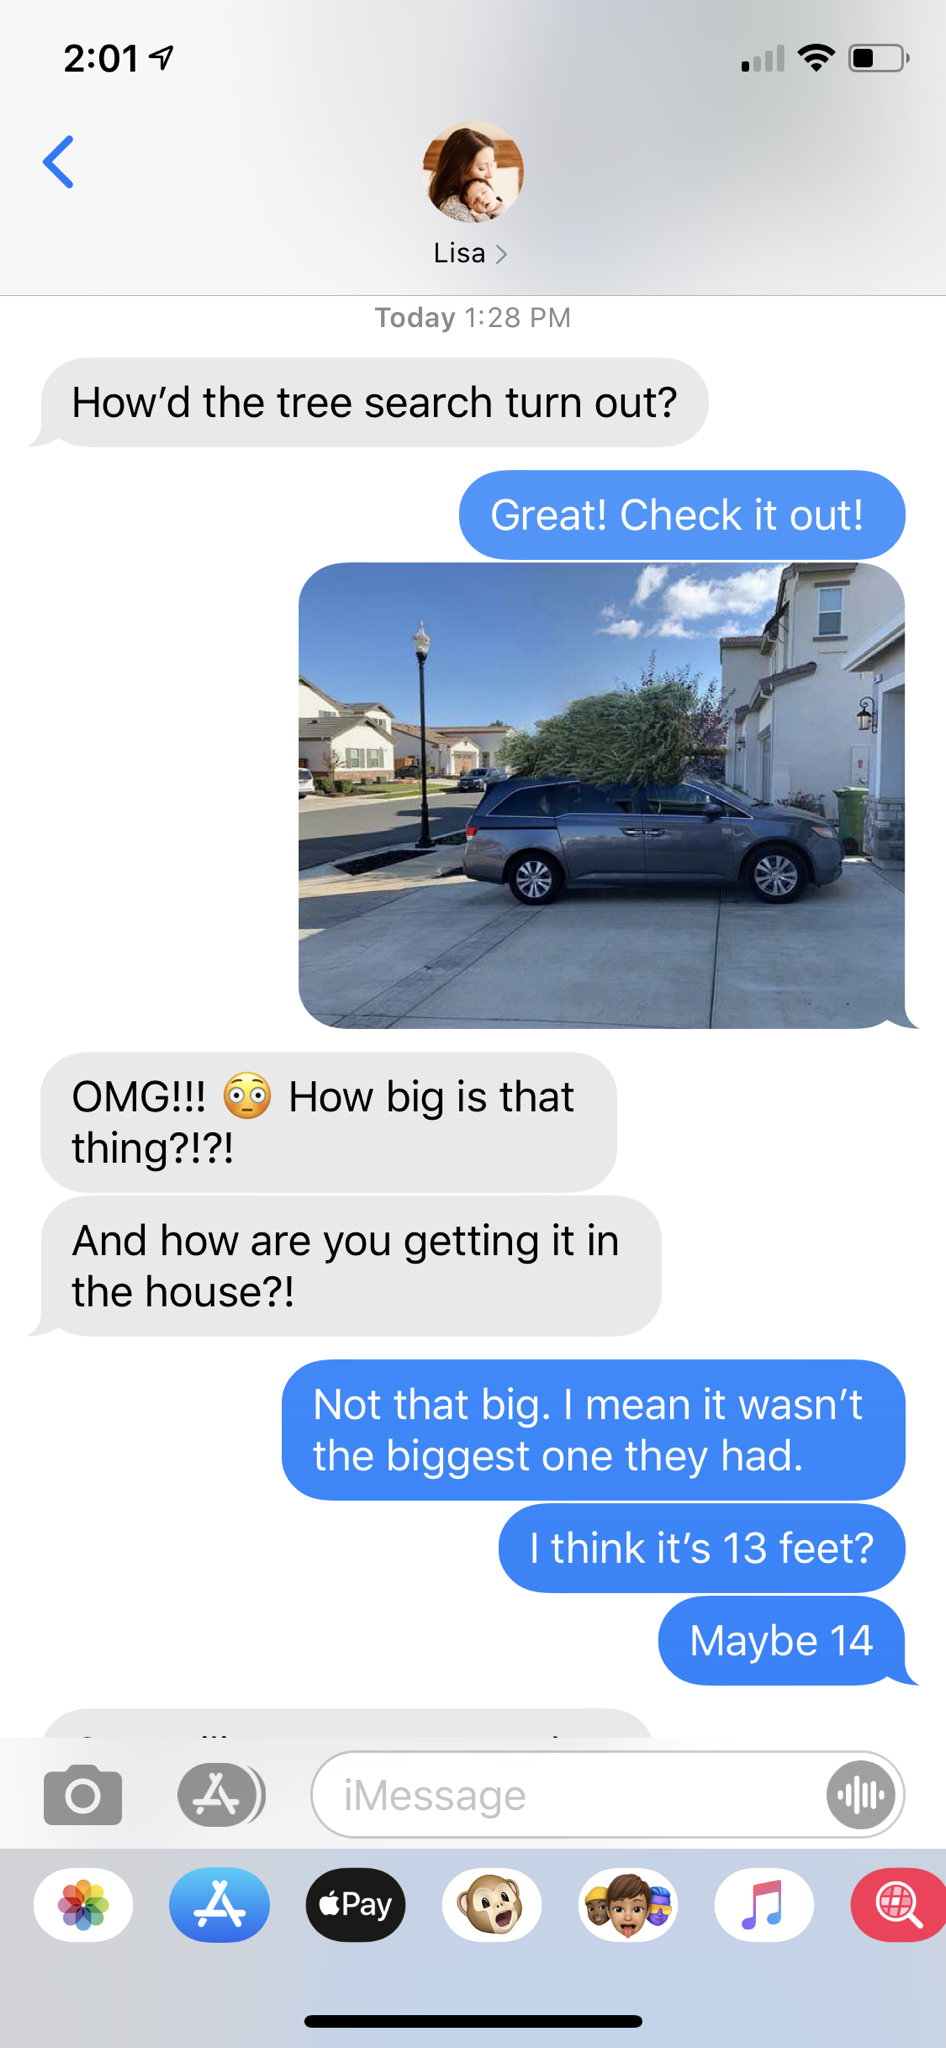 annoy your friends - Today How'd the tree search turn out? Great! Check it out! How big is that Omg!!! thing?!?! And how are you getting it in the house?! Not that big. I mean it wasn't the biggest one they had. I think it's 13 feet? Maybe 14 A Message